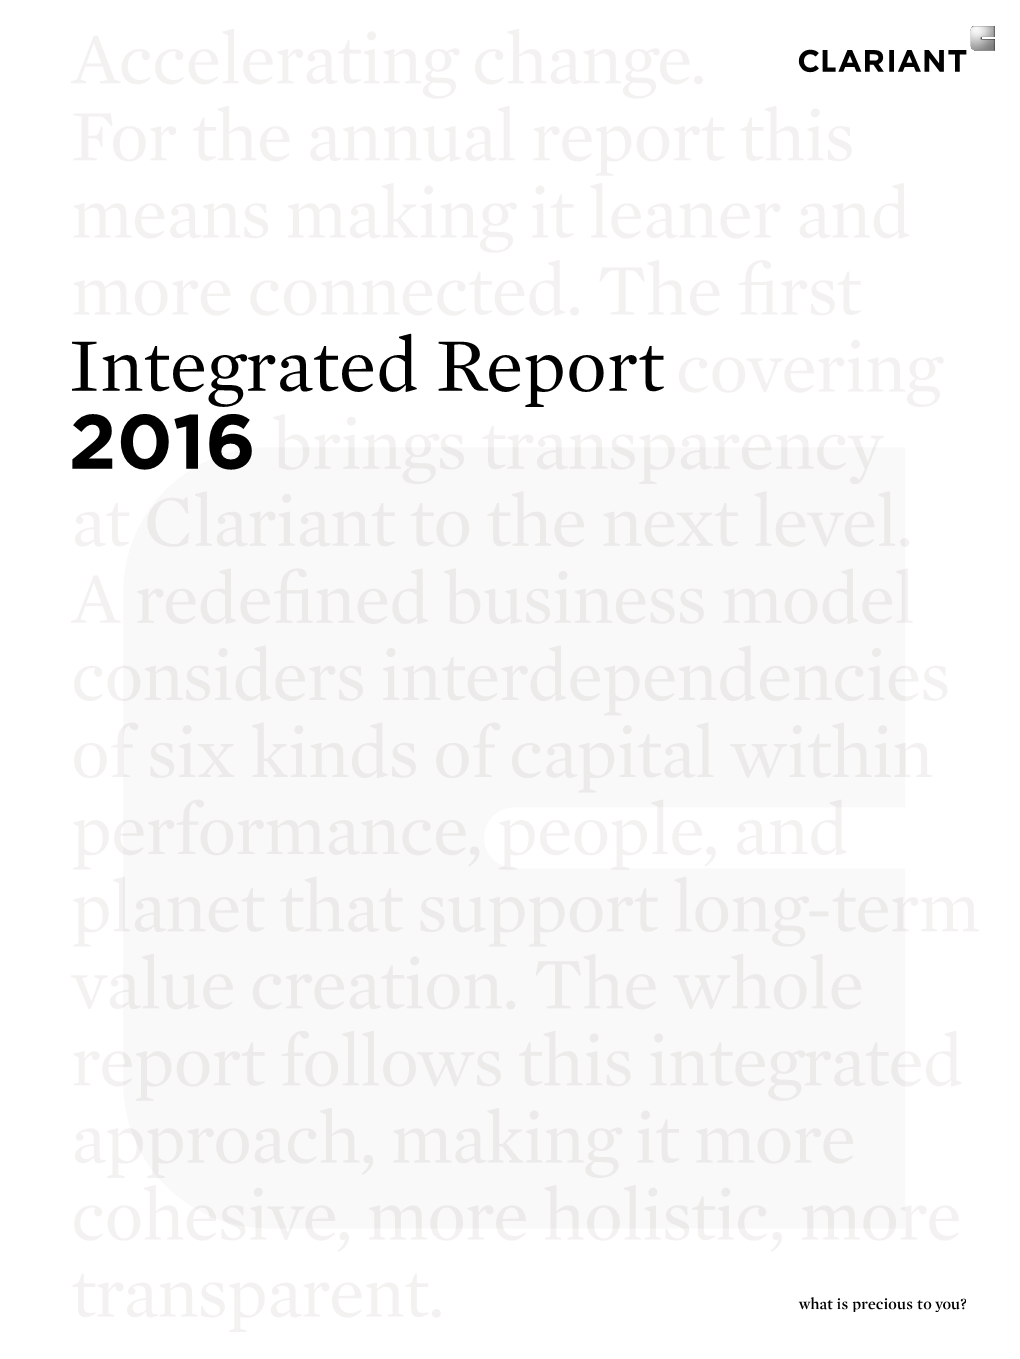 Clariant Integrated Report 2016 2016 Integrated Report Transparent